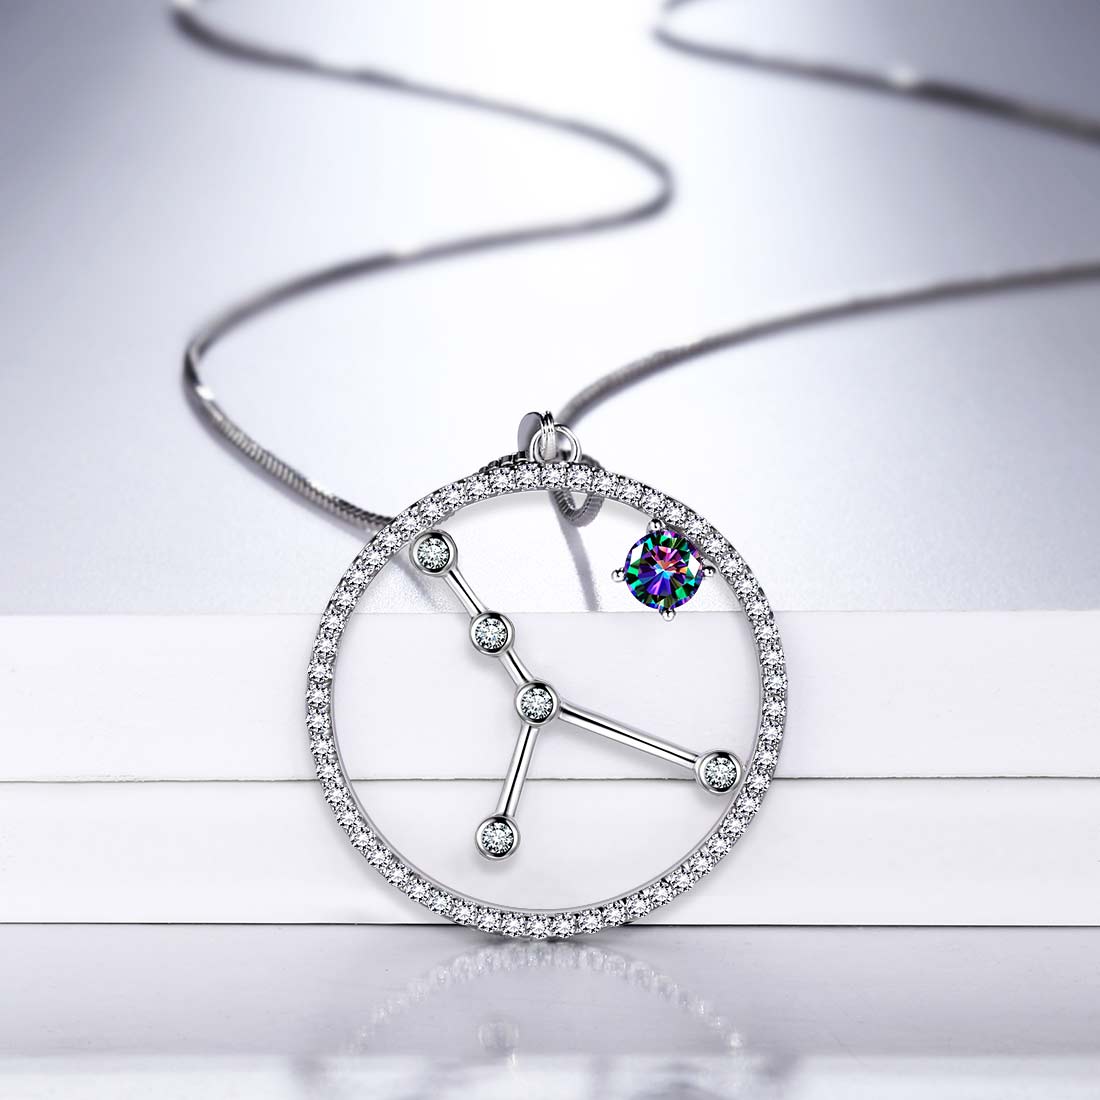 Cancer Zodiac Necklace 925 Sterling Silver - Necklaces - Aurora Tears Jewelry